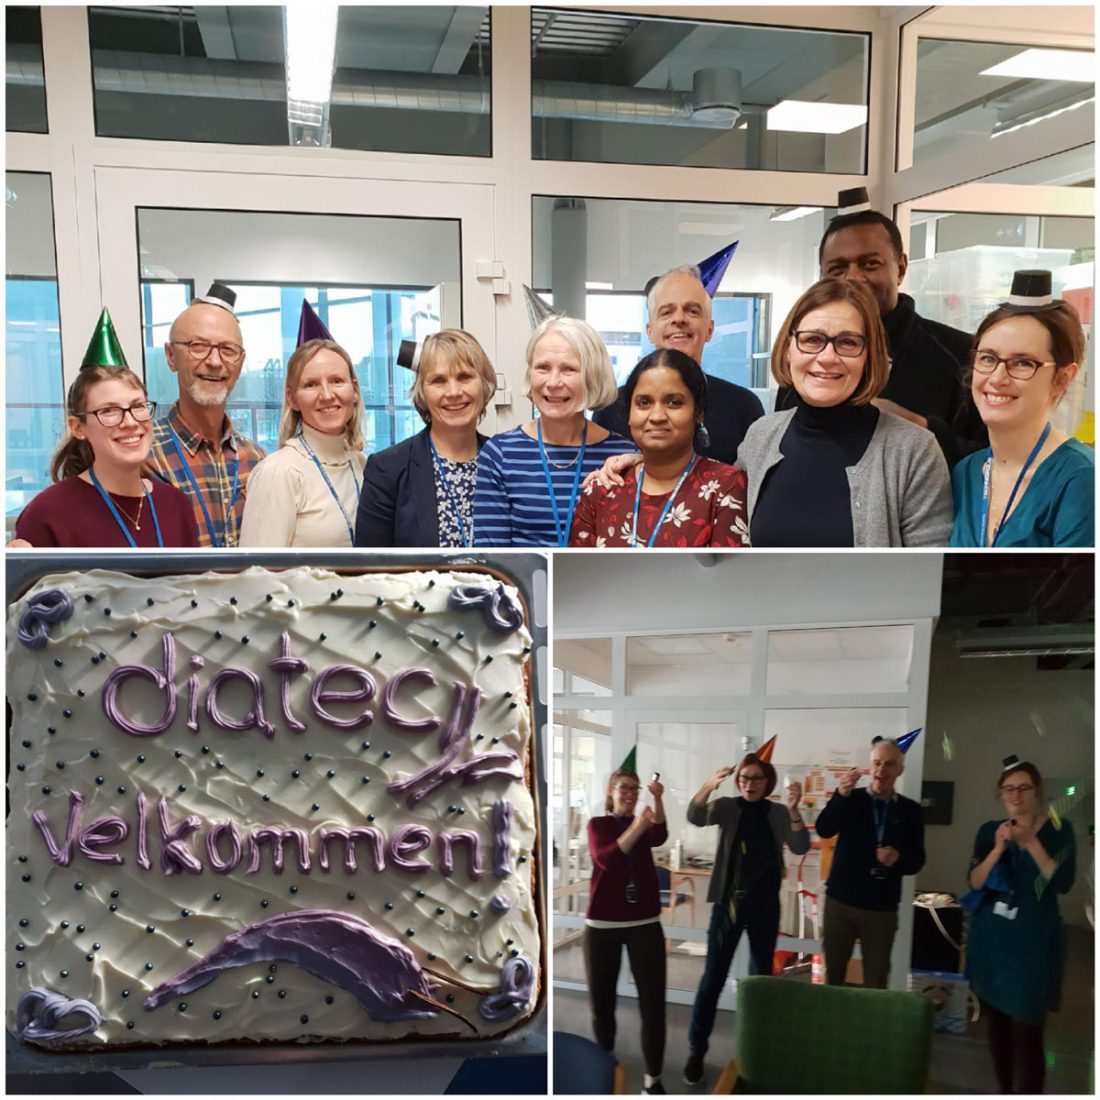 Celebrating team members wearing party hats. There is also a cake with the Diatec logo, with the word "Velkommen!" (meaning "Welcome!" in norweagian) written under it in purple frosting.